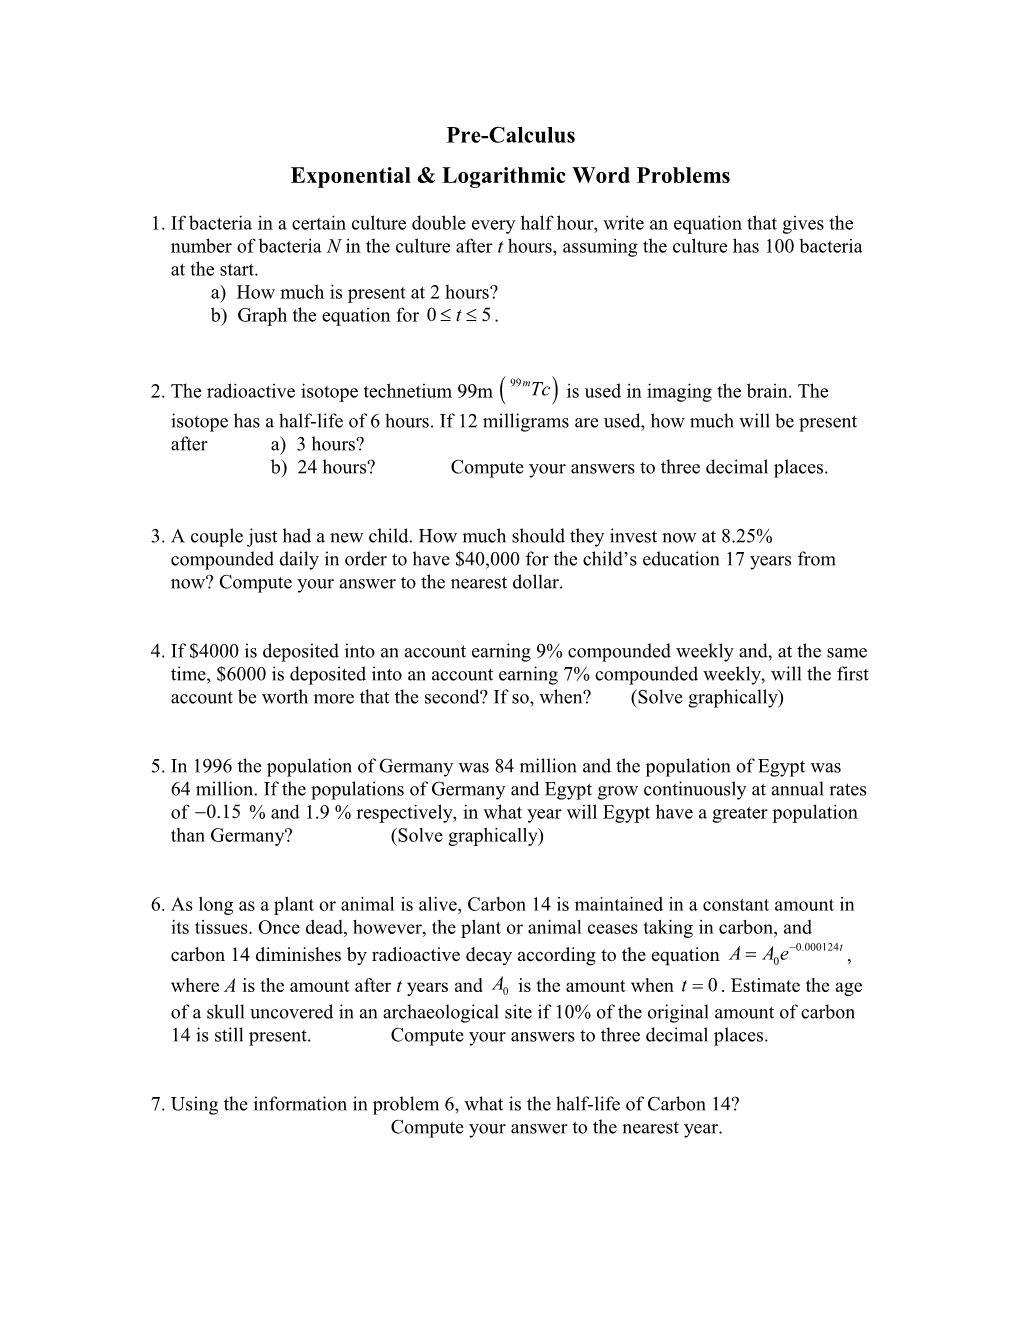 Exponential & Logarithmic Word Problems